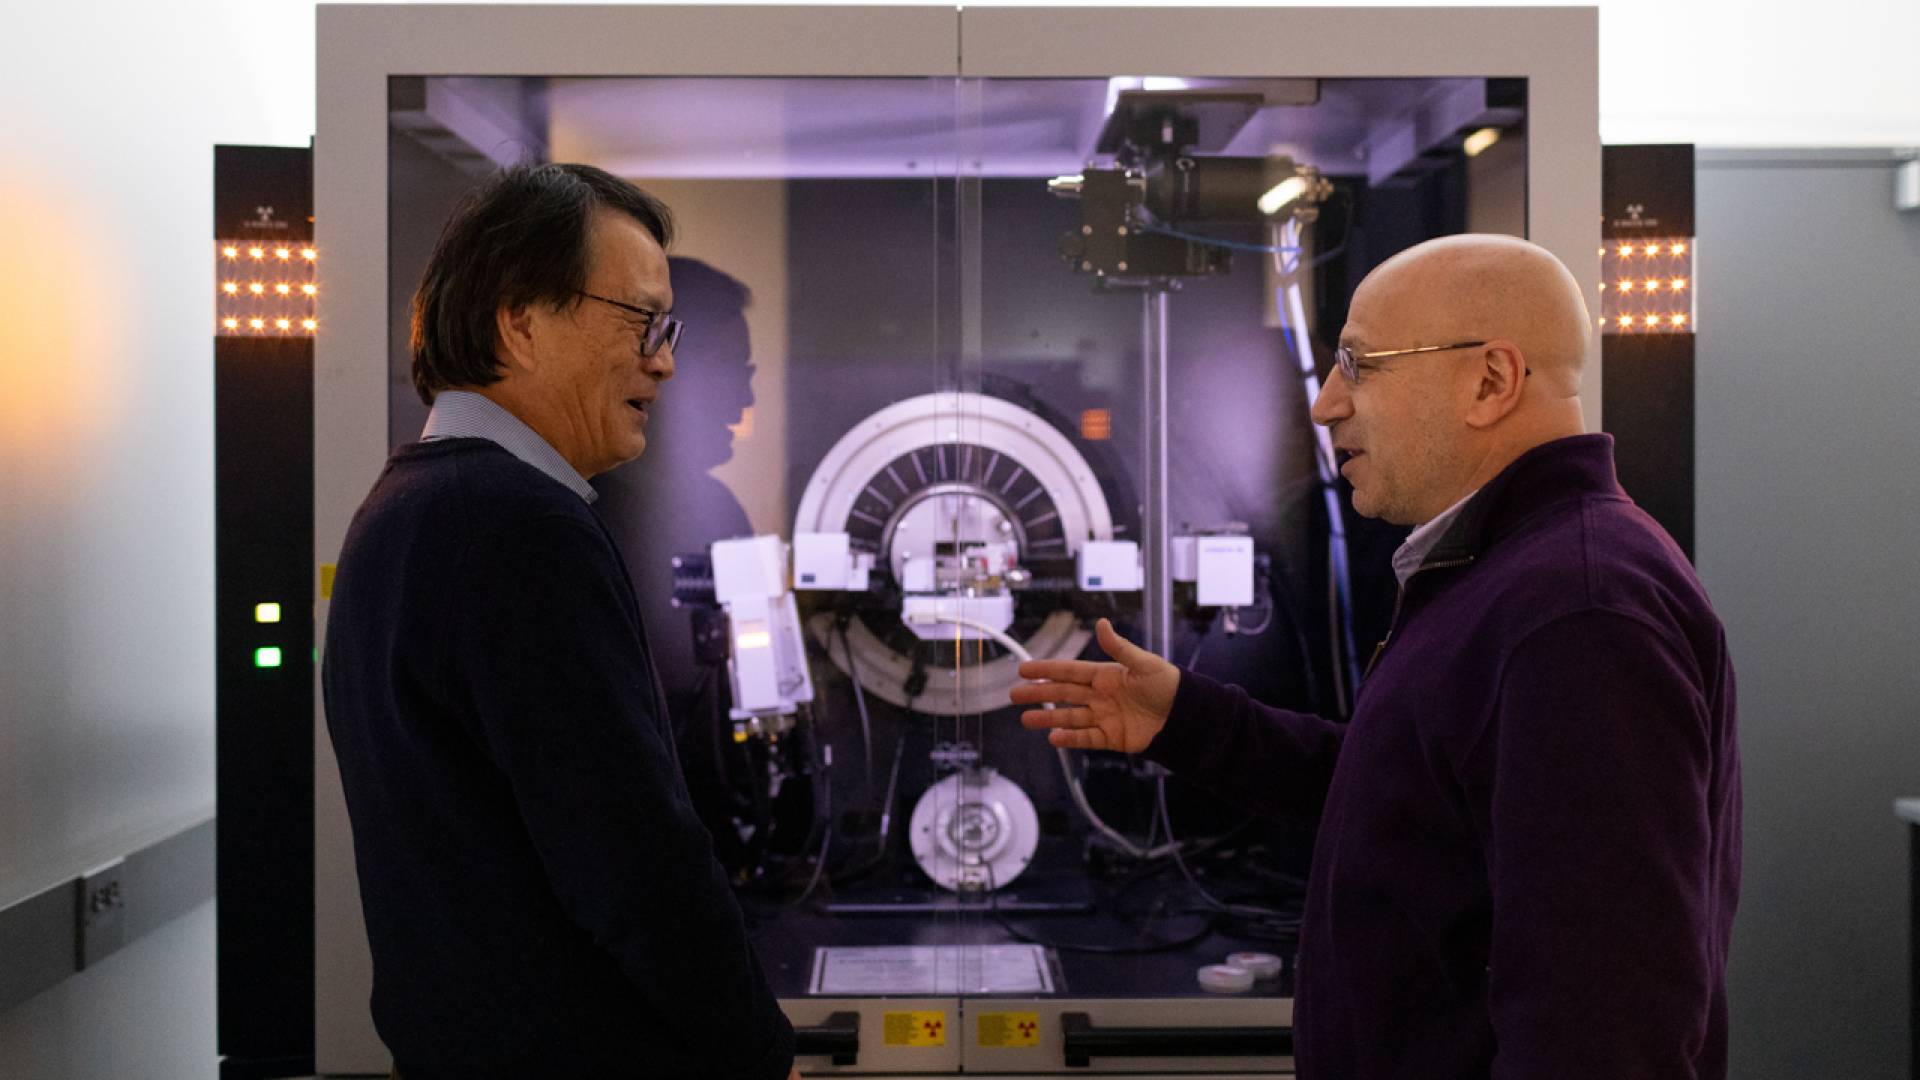 Two scientists stand in front of a large, shiny machine.